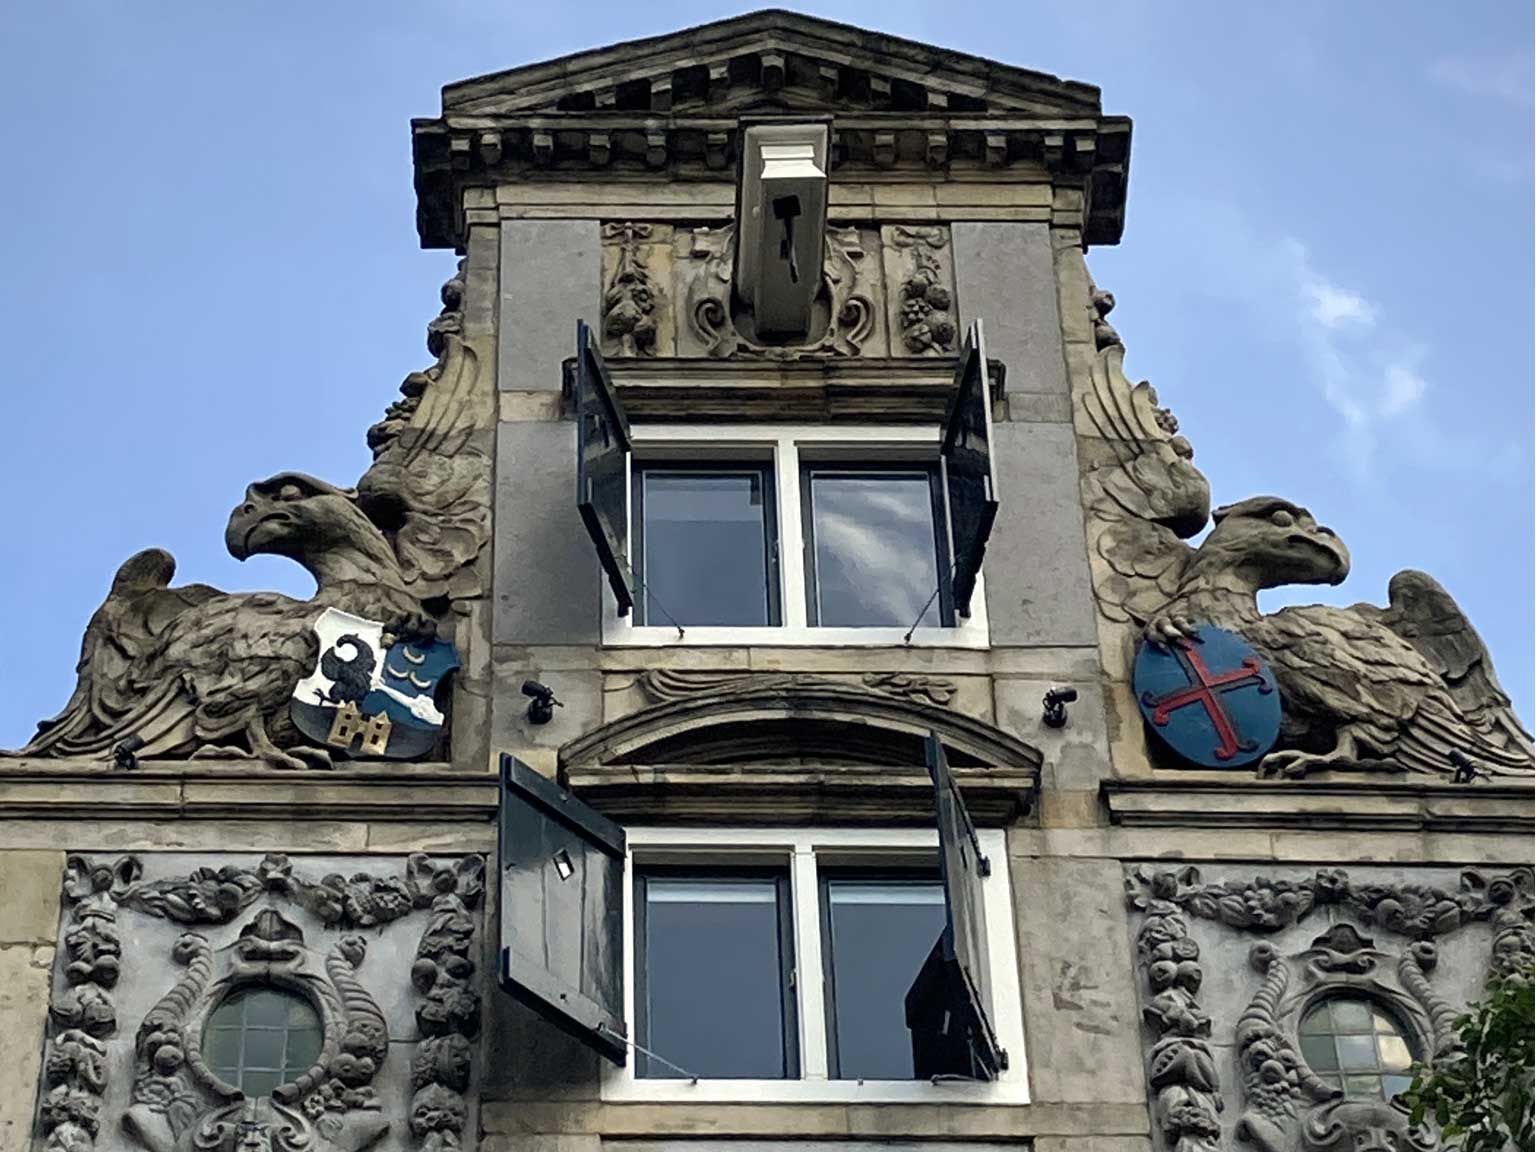 Close-up of the gable of the House with the Eagles at Rokin 91, Amsterdam